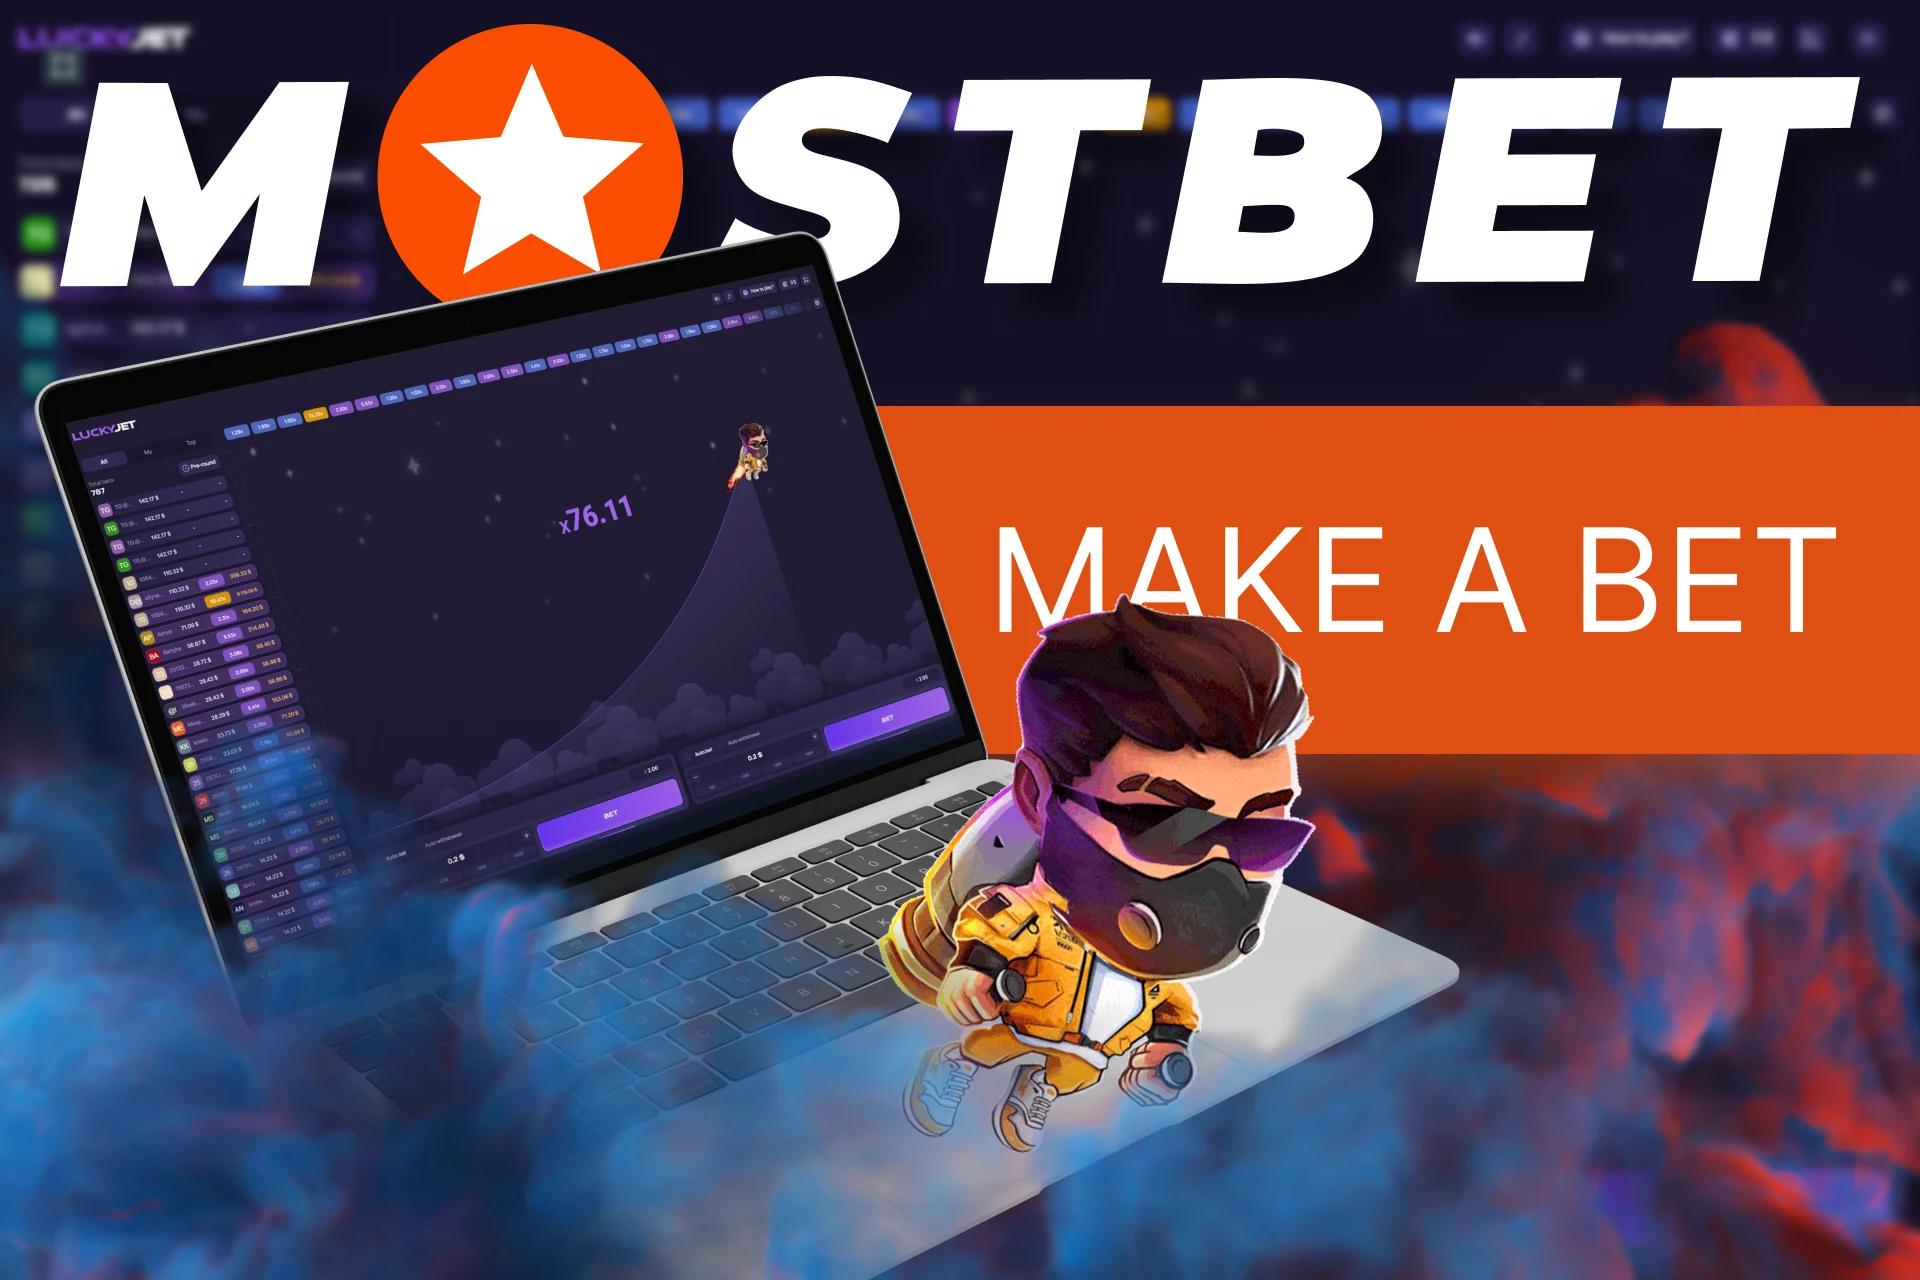 With these instructions from Mostbet, learn how you can play and how to win at Lucky Jet.